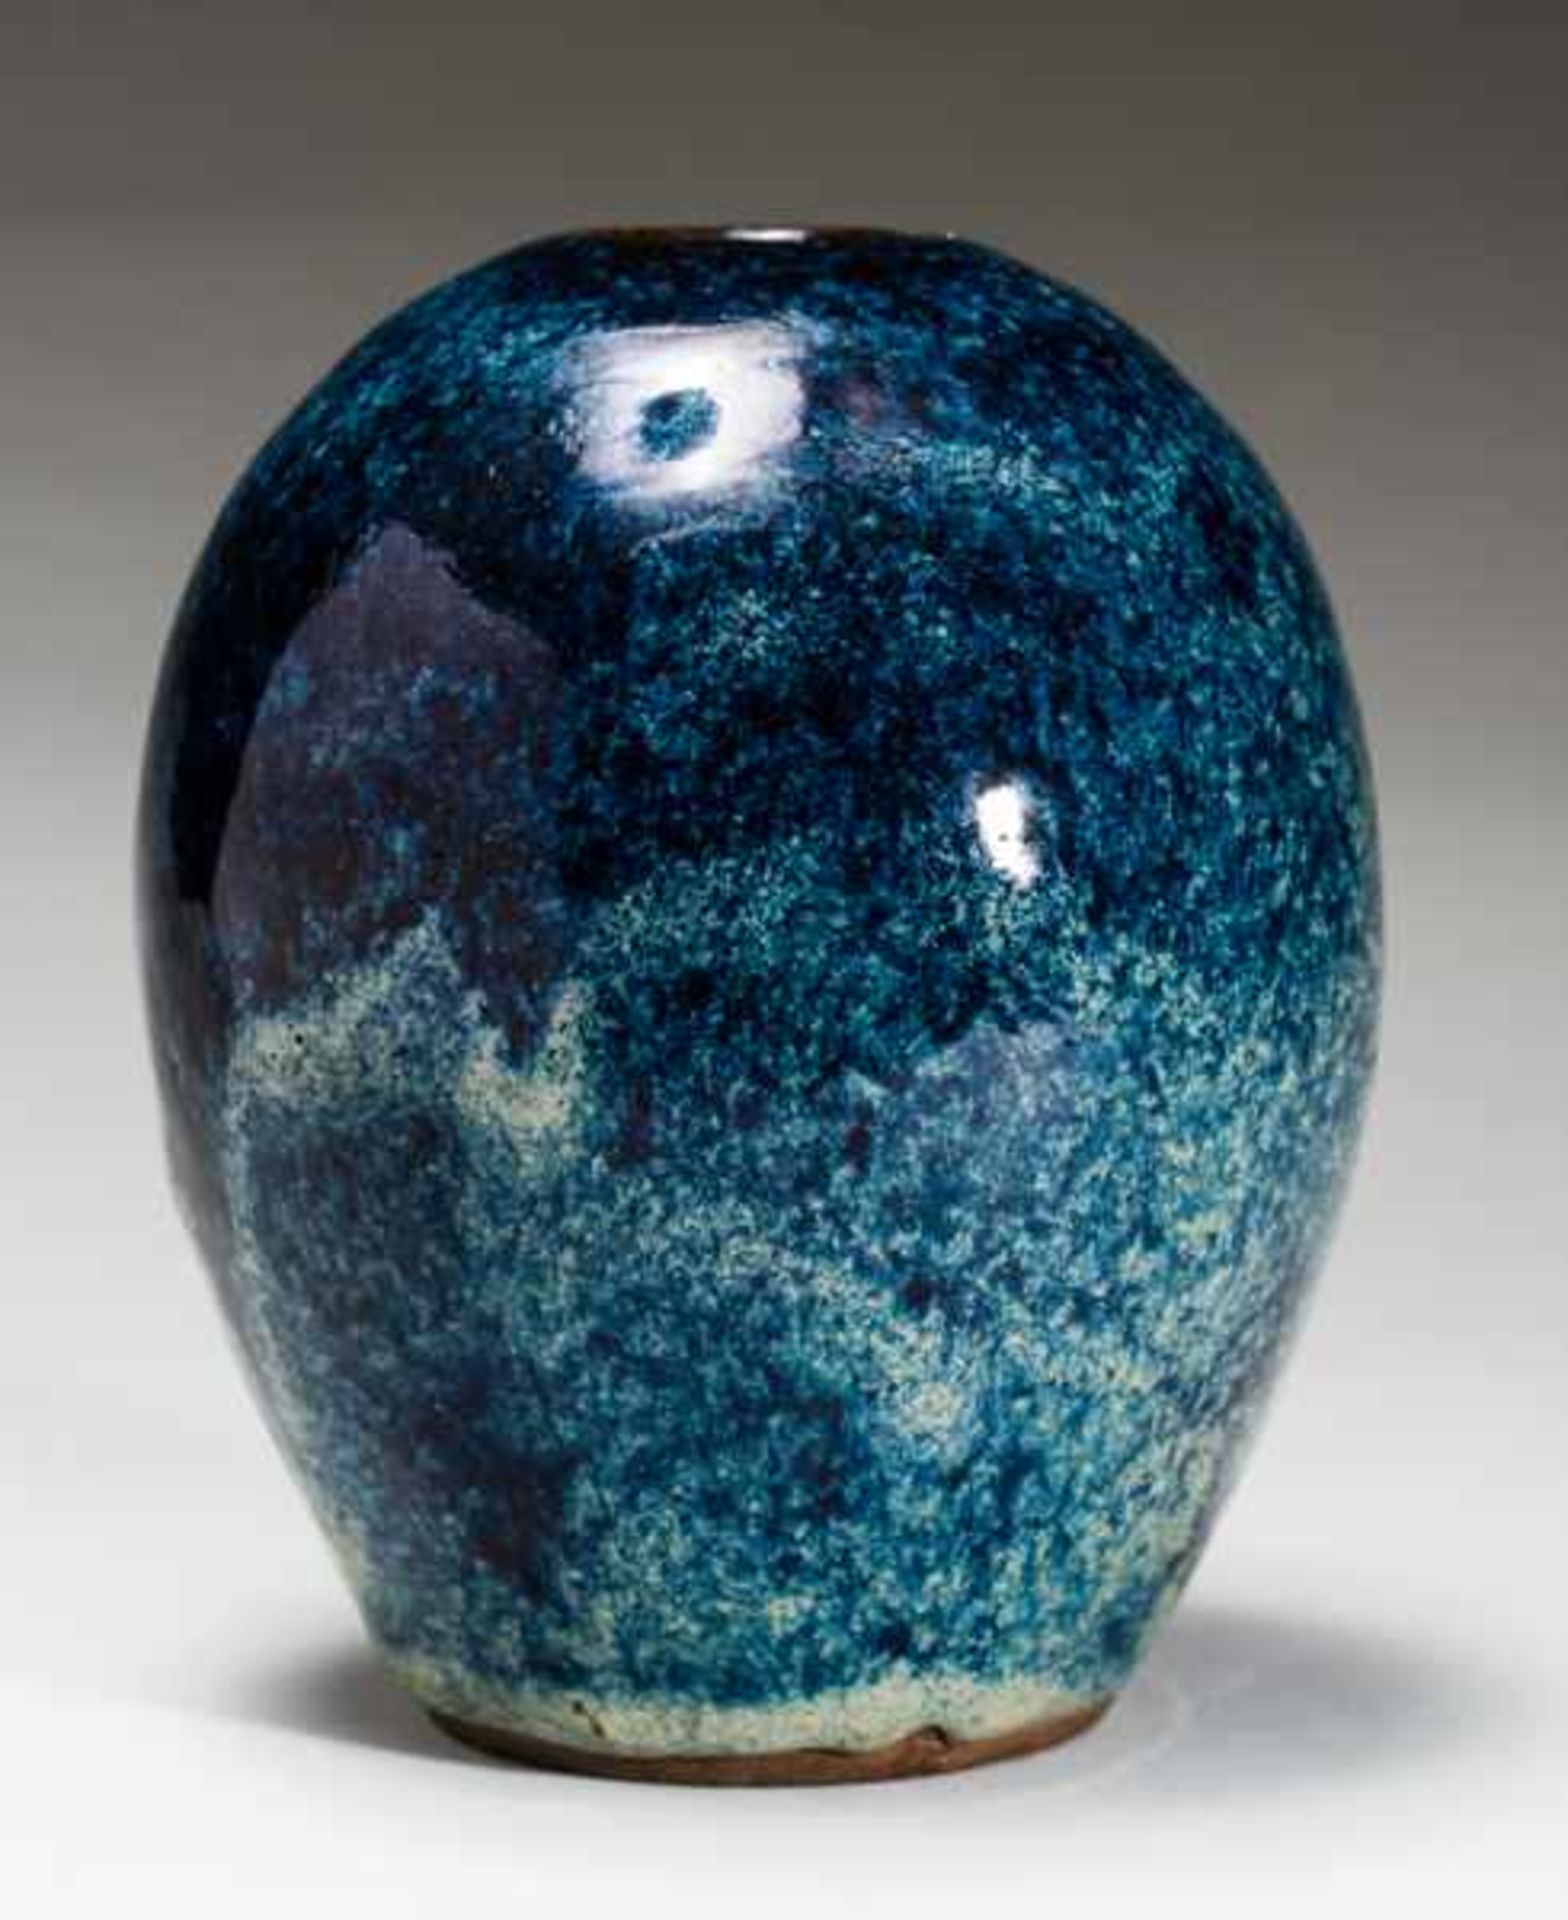 OVAL VASE WITH SPECKLED GLAZE Glazed ceramic. China, The oval vase has no neck and the opening is - Image 4 of 5